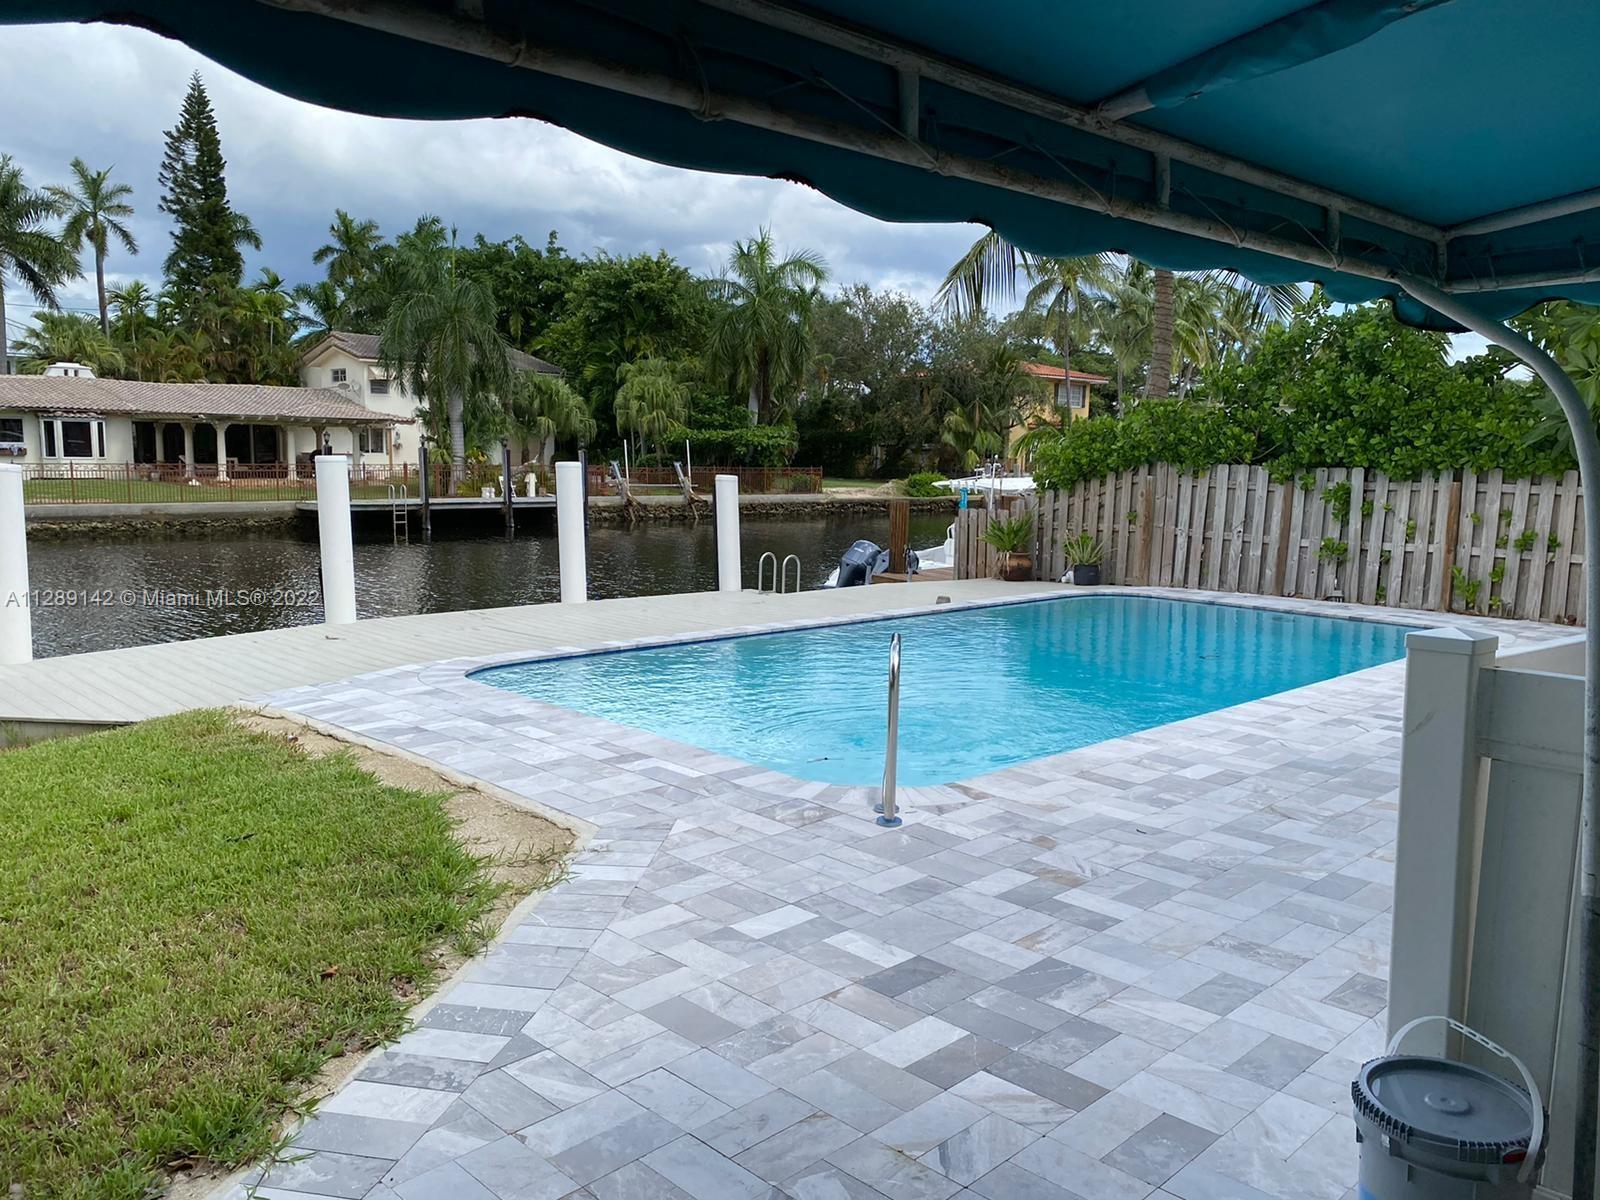 THE HOTTEST LOCATION YOU COULD ASK FOR! A WATERFRONT POOL RIGHT SMACK ON LAS OLAS BLVD!!!!!
-As its